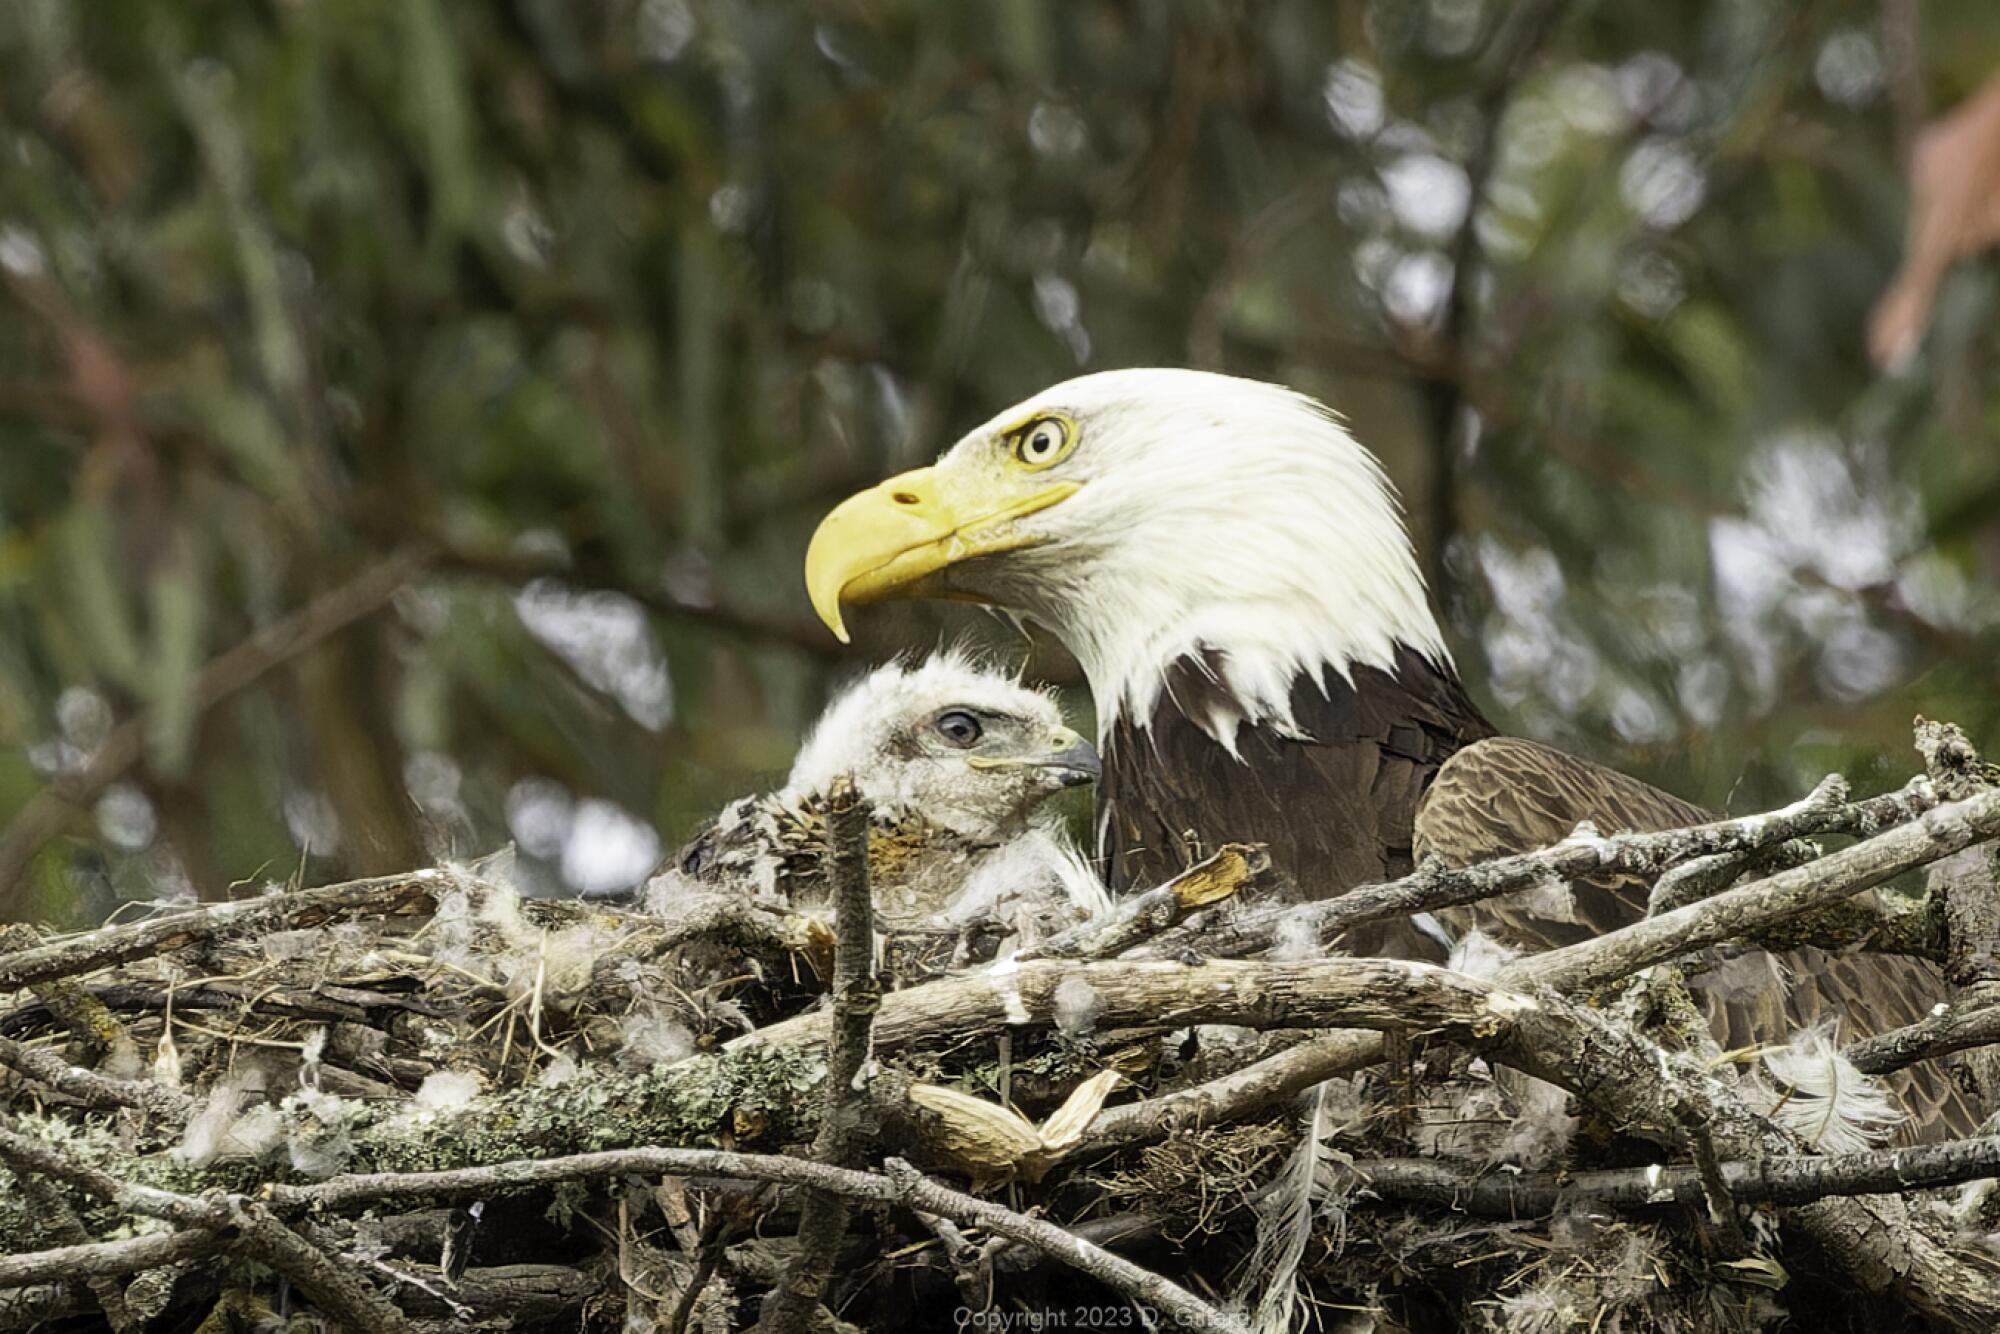 A fuzzy red-tailed hawk baby is looked over by a bald eagle in a nest. 